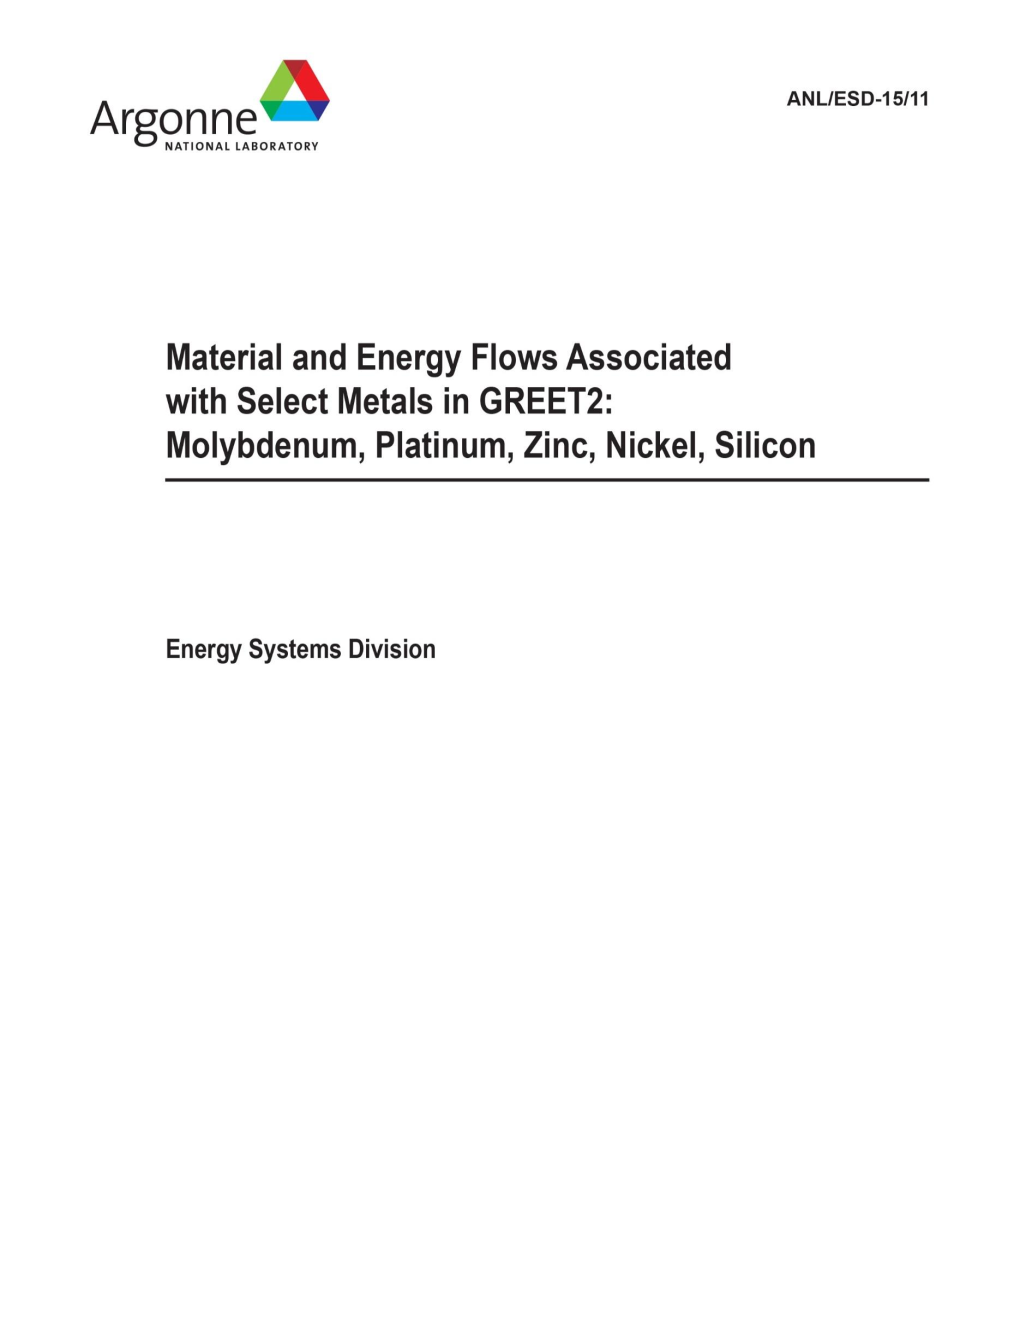 Material and Energy Flows Associated with Select Metals in GREET 2